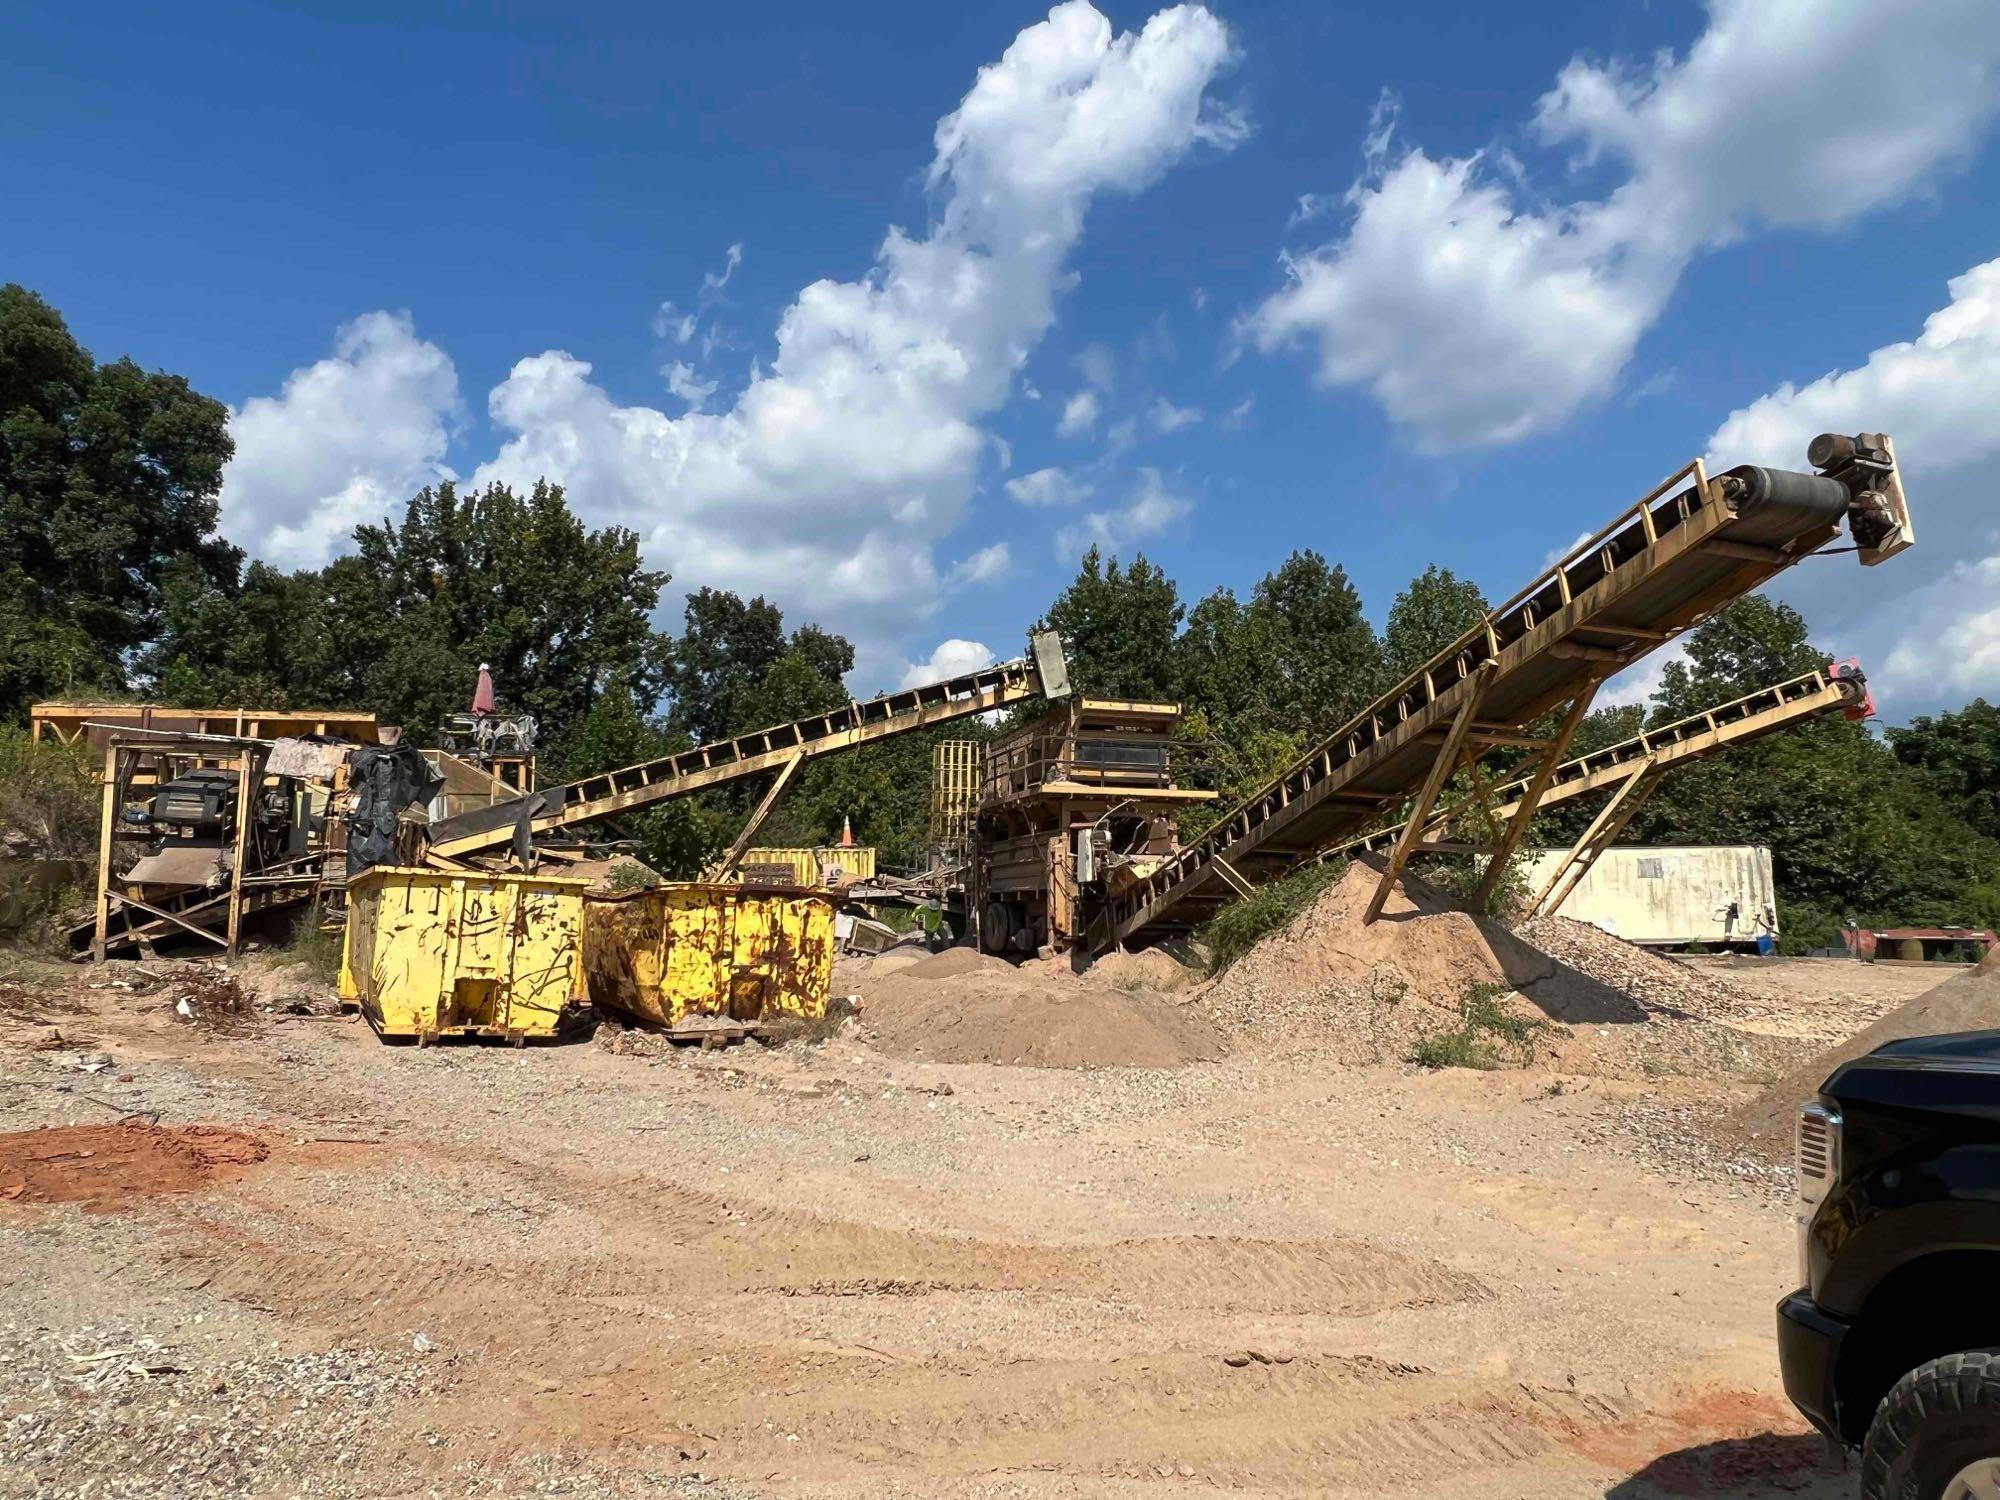 CLOSED CIRCUIT CRUSHER AND SCREEN 5X20 FEEDER 32X55.